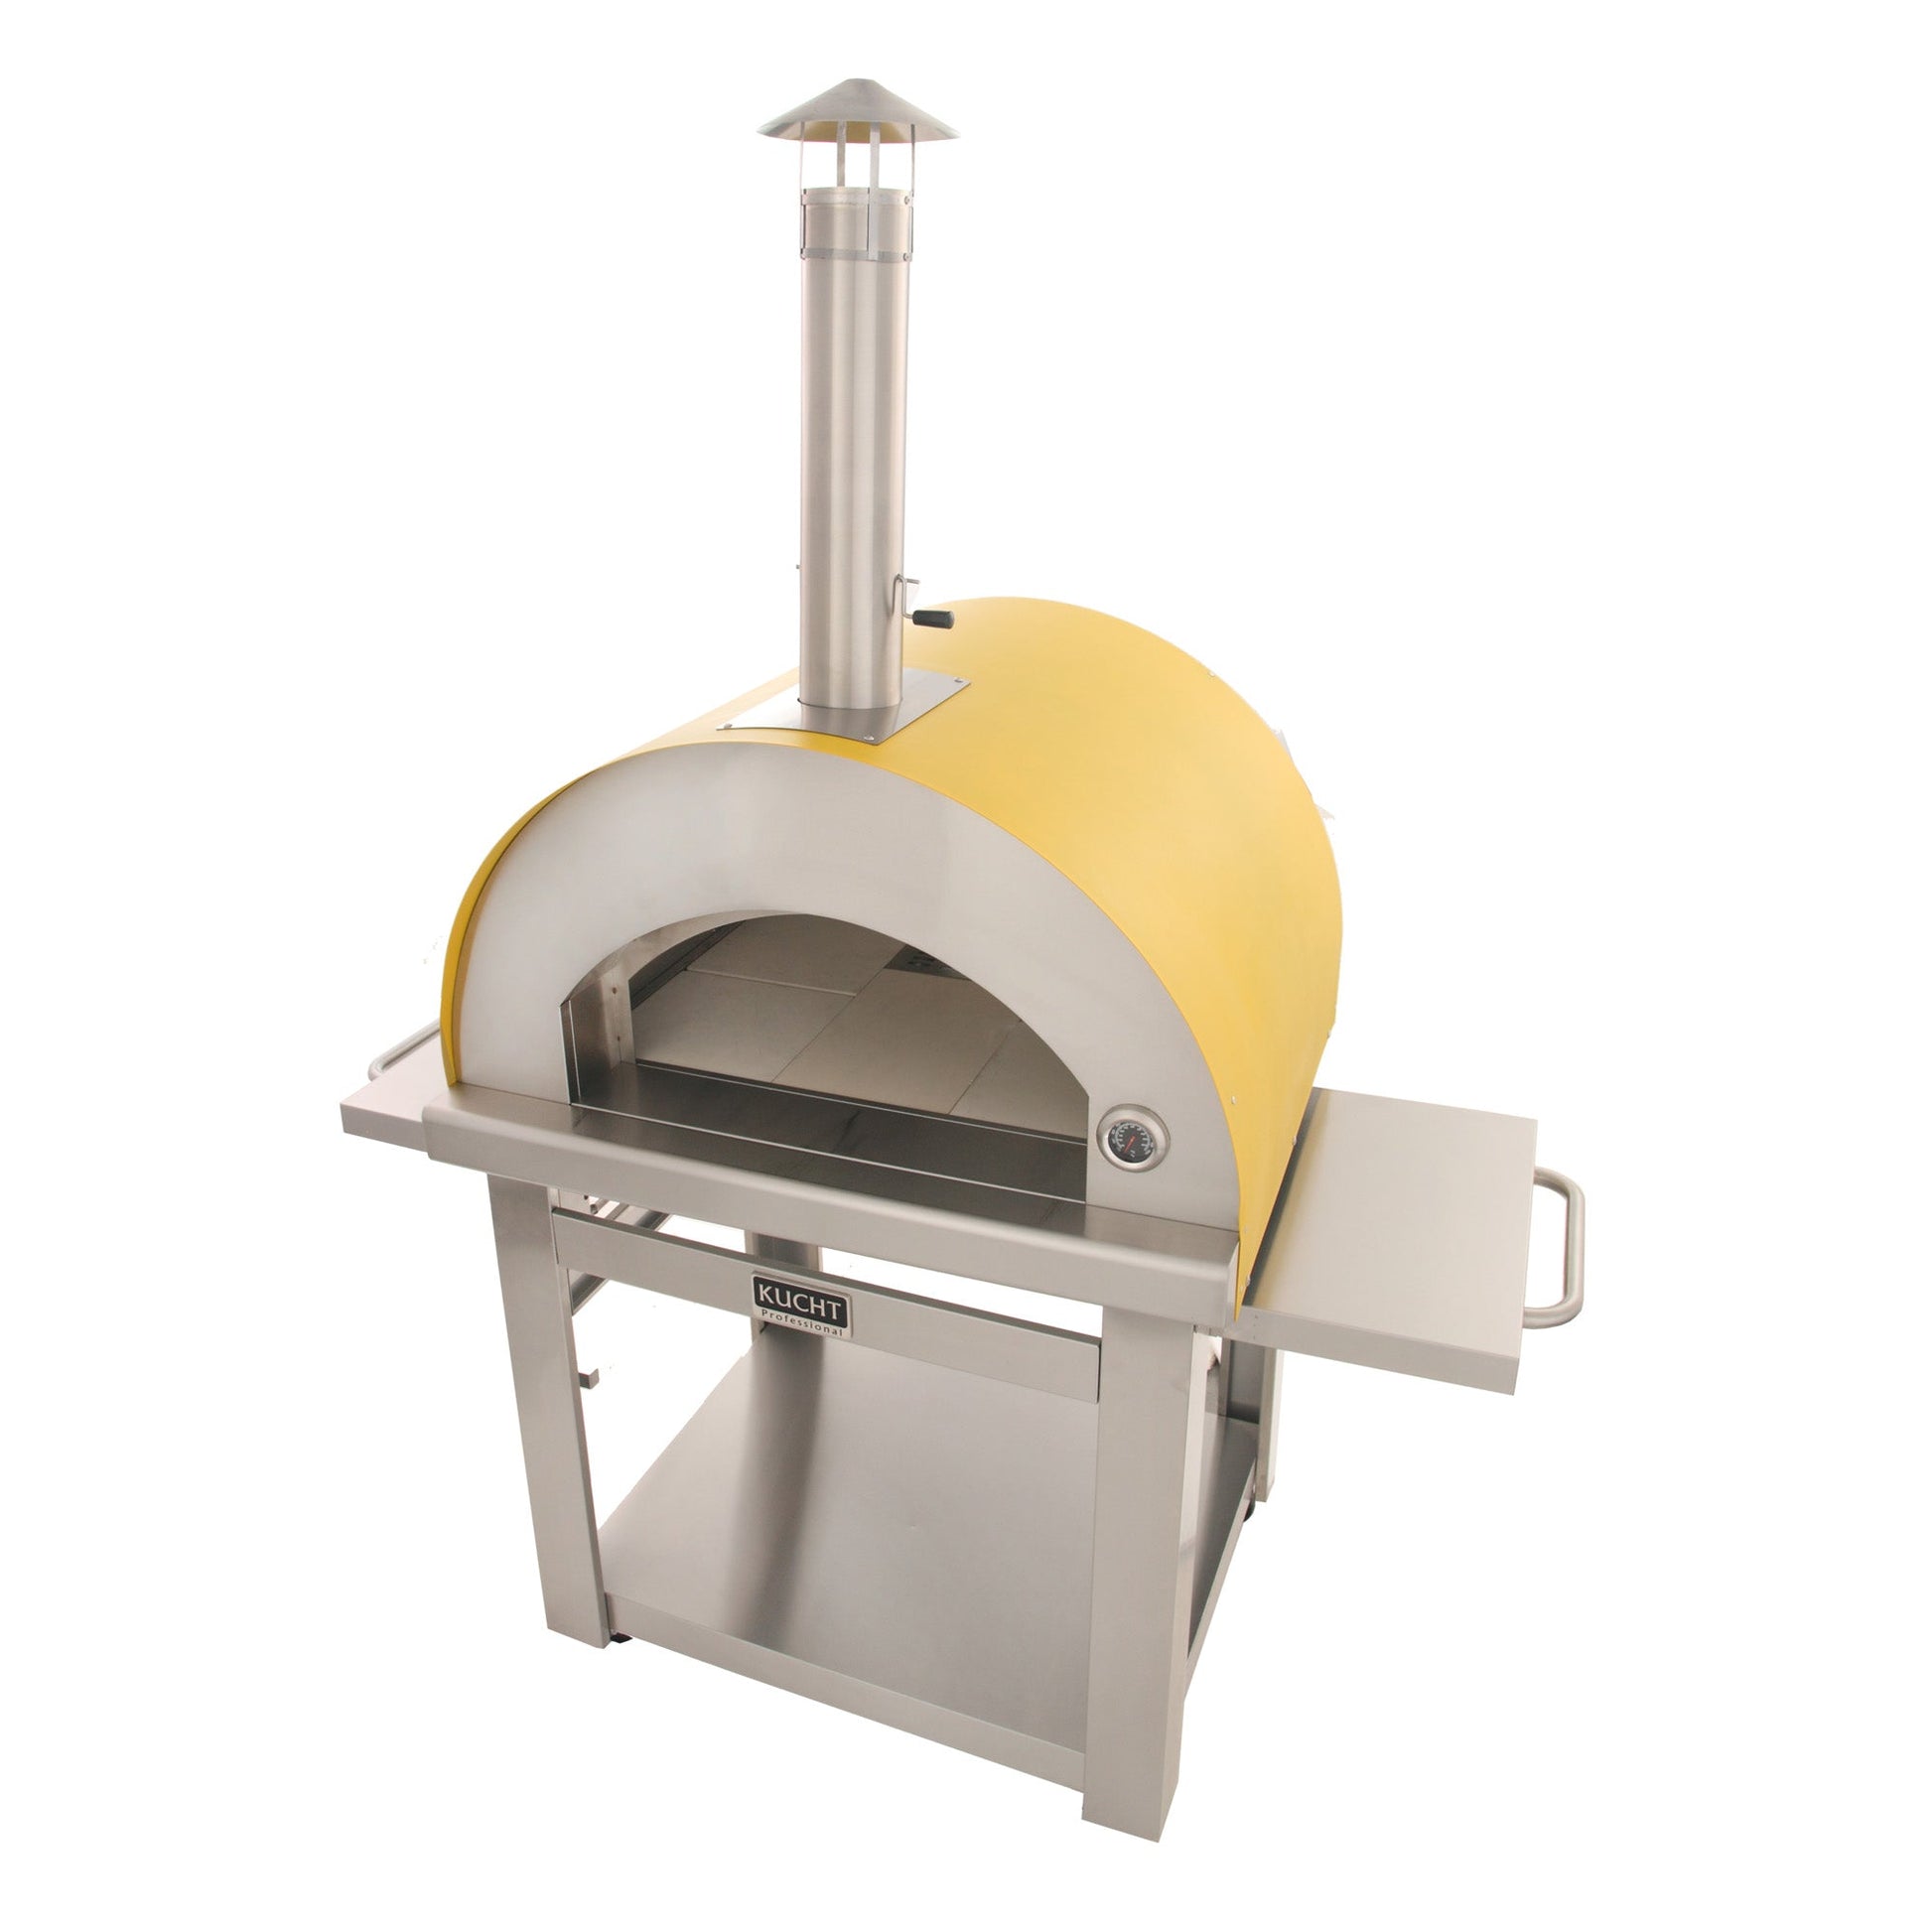 Kucht Venice Yellow Outdoor Pizza Oven With All-Weather Cover